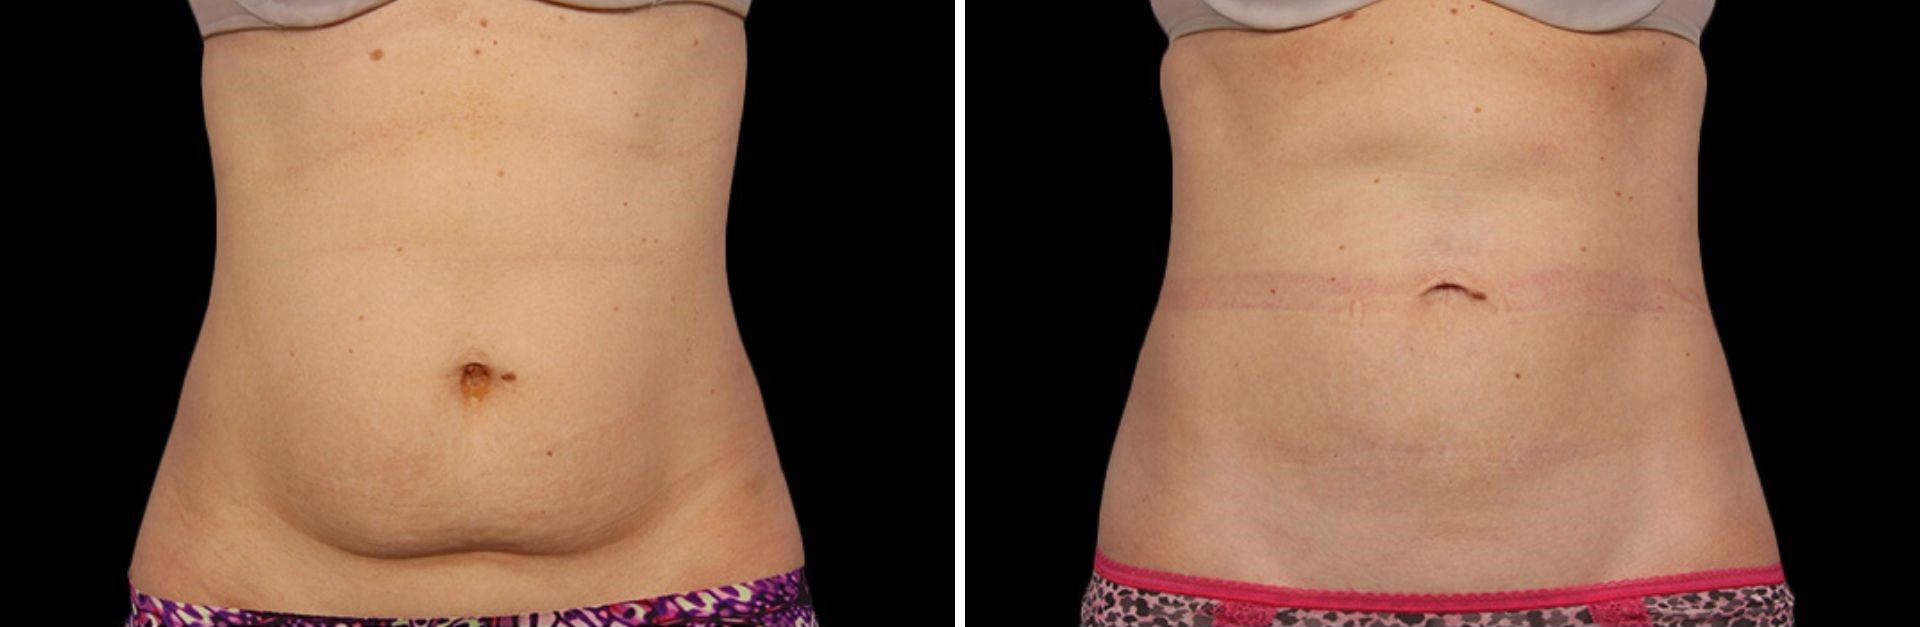 CoolSculpting Before and After Images  Real Patient Results